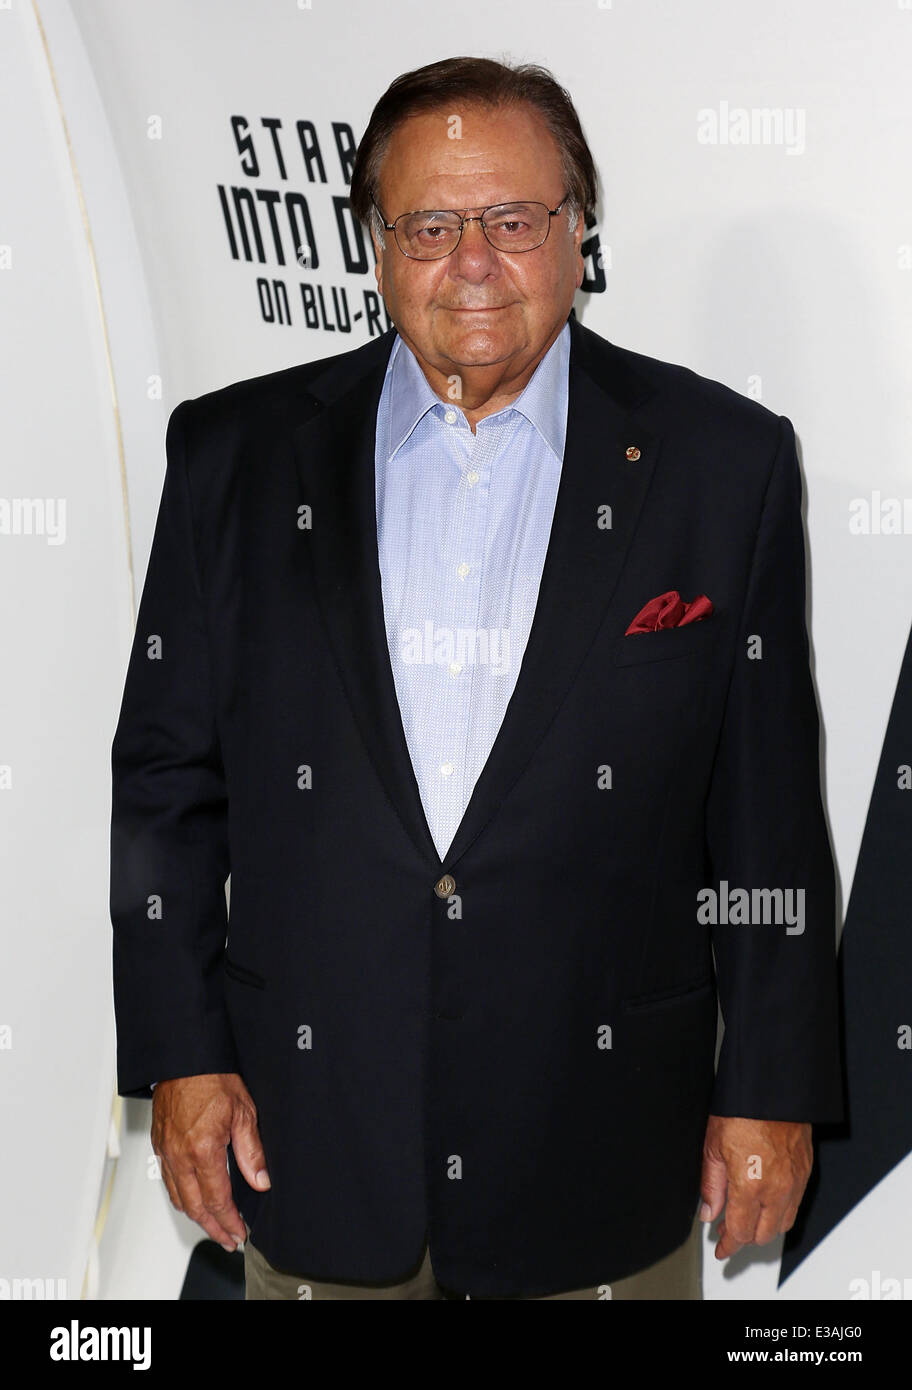 Celebrities attend STAR TREK INTO DARKNESS Blu-ray and DVD debut at California Science Center.  Featuring: Paul Sorvino Where: Los Angeles, CA, United States When: 11 Sep 2013 Stock Photo